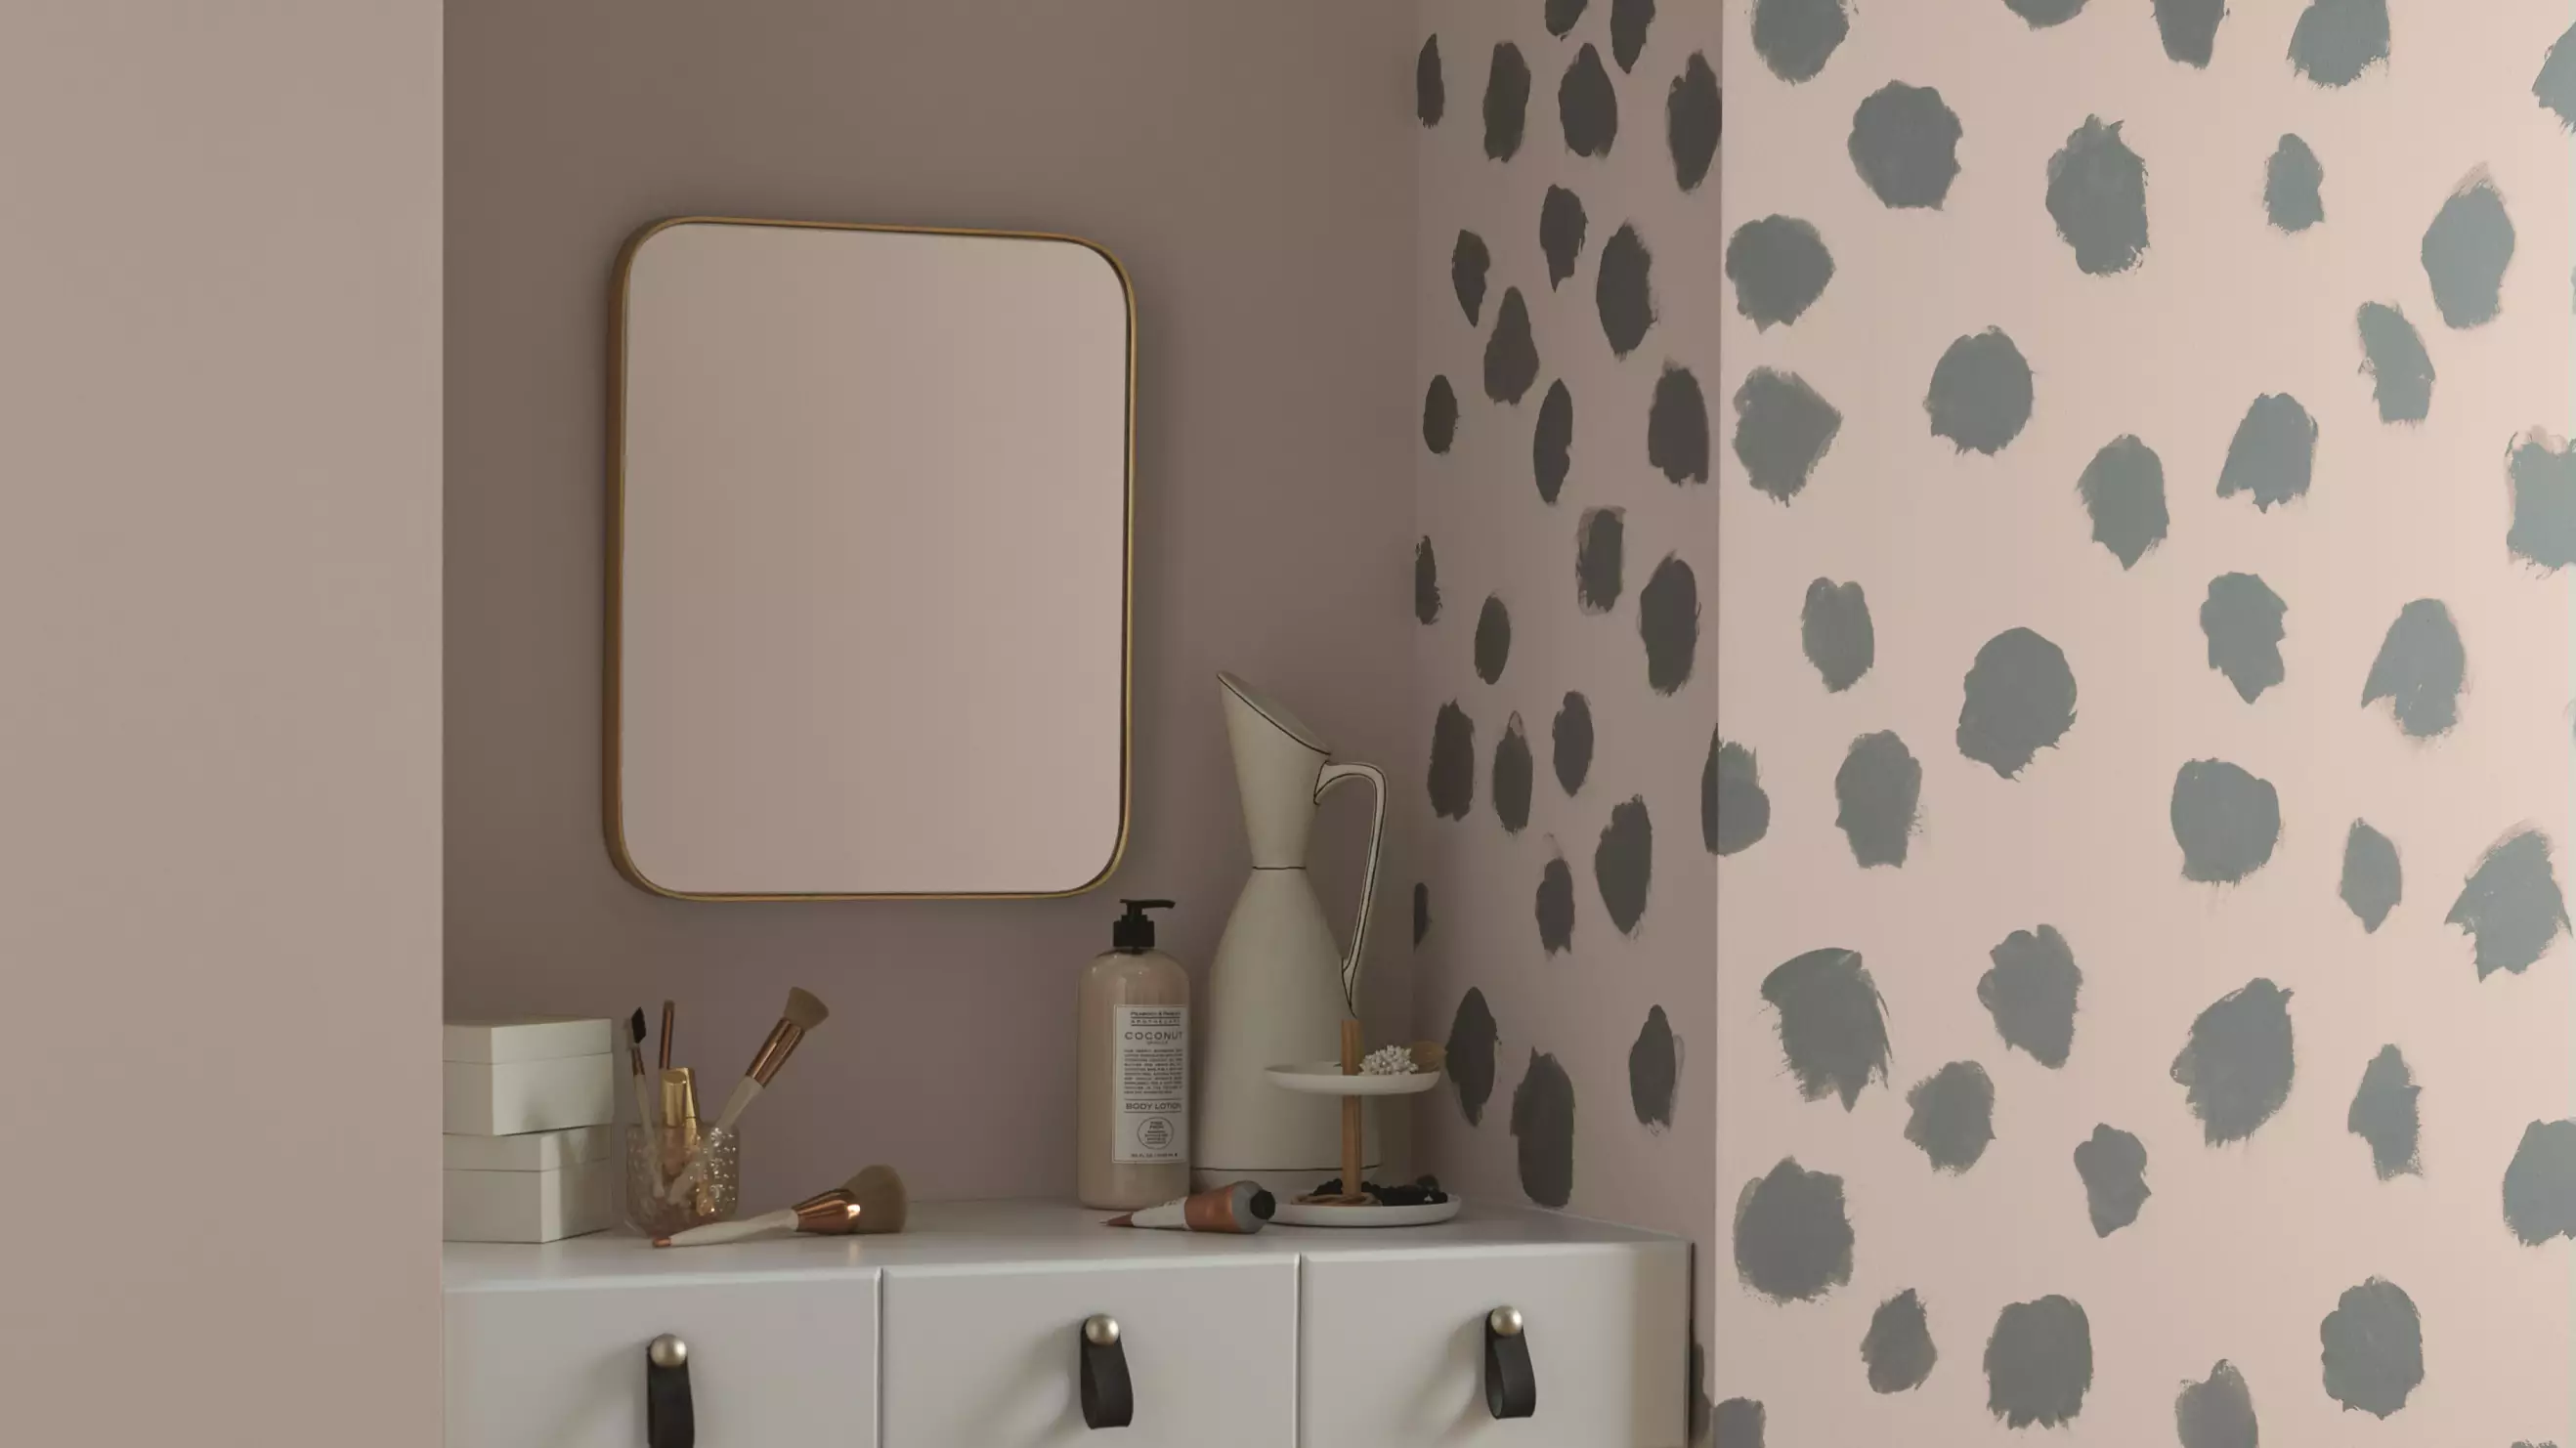 ​These Polka Dot Feature Walls Are Serious Goals